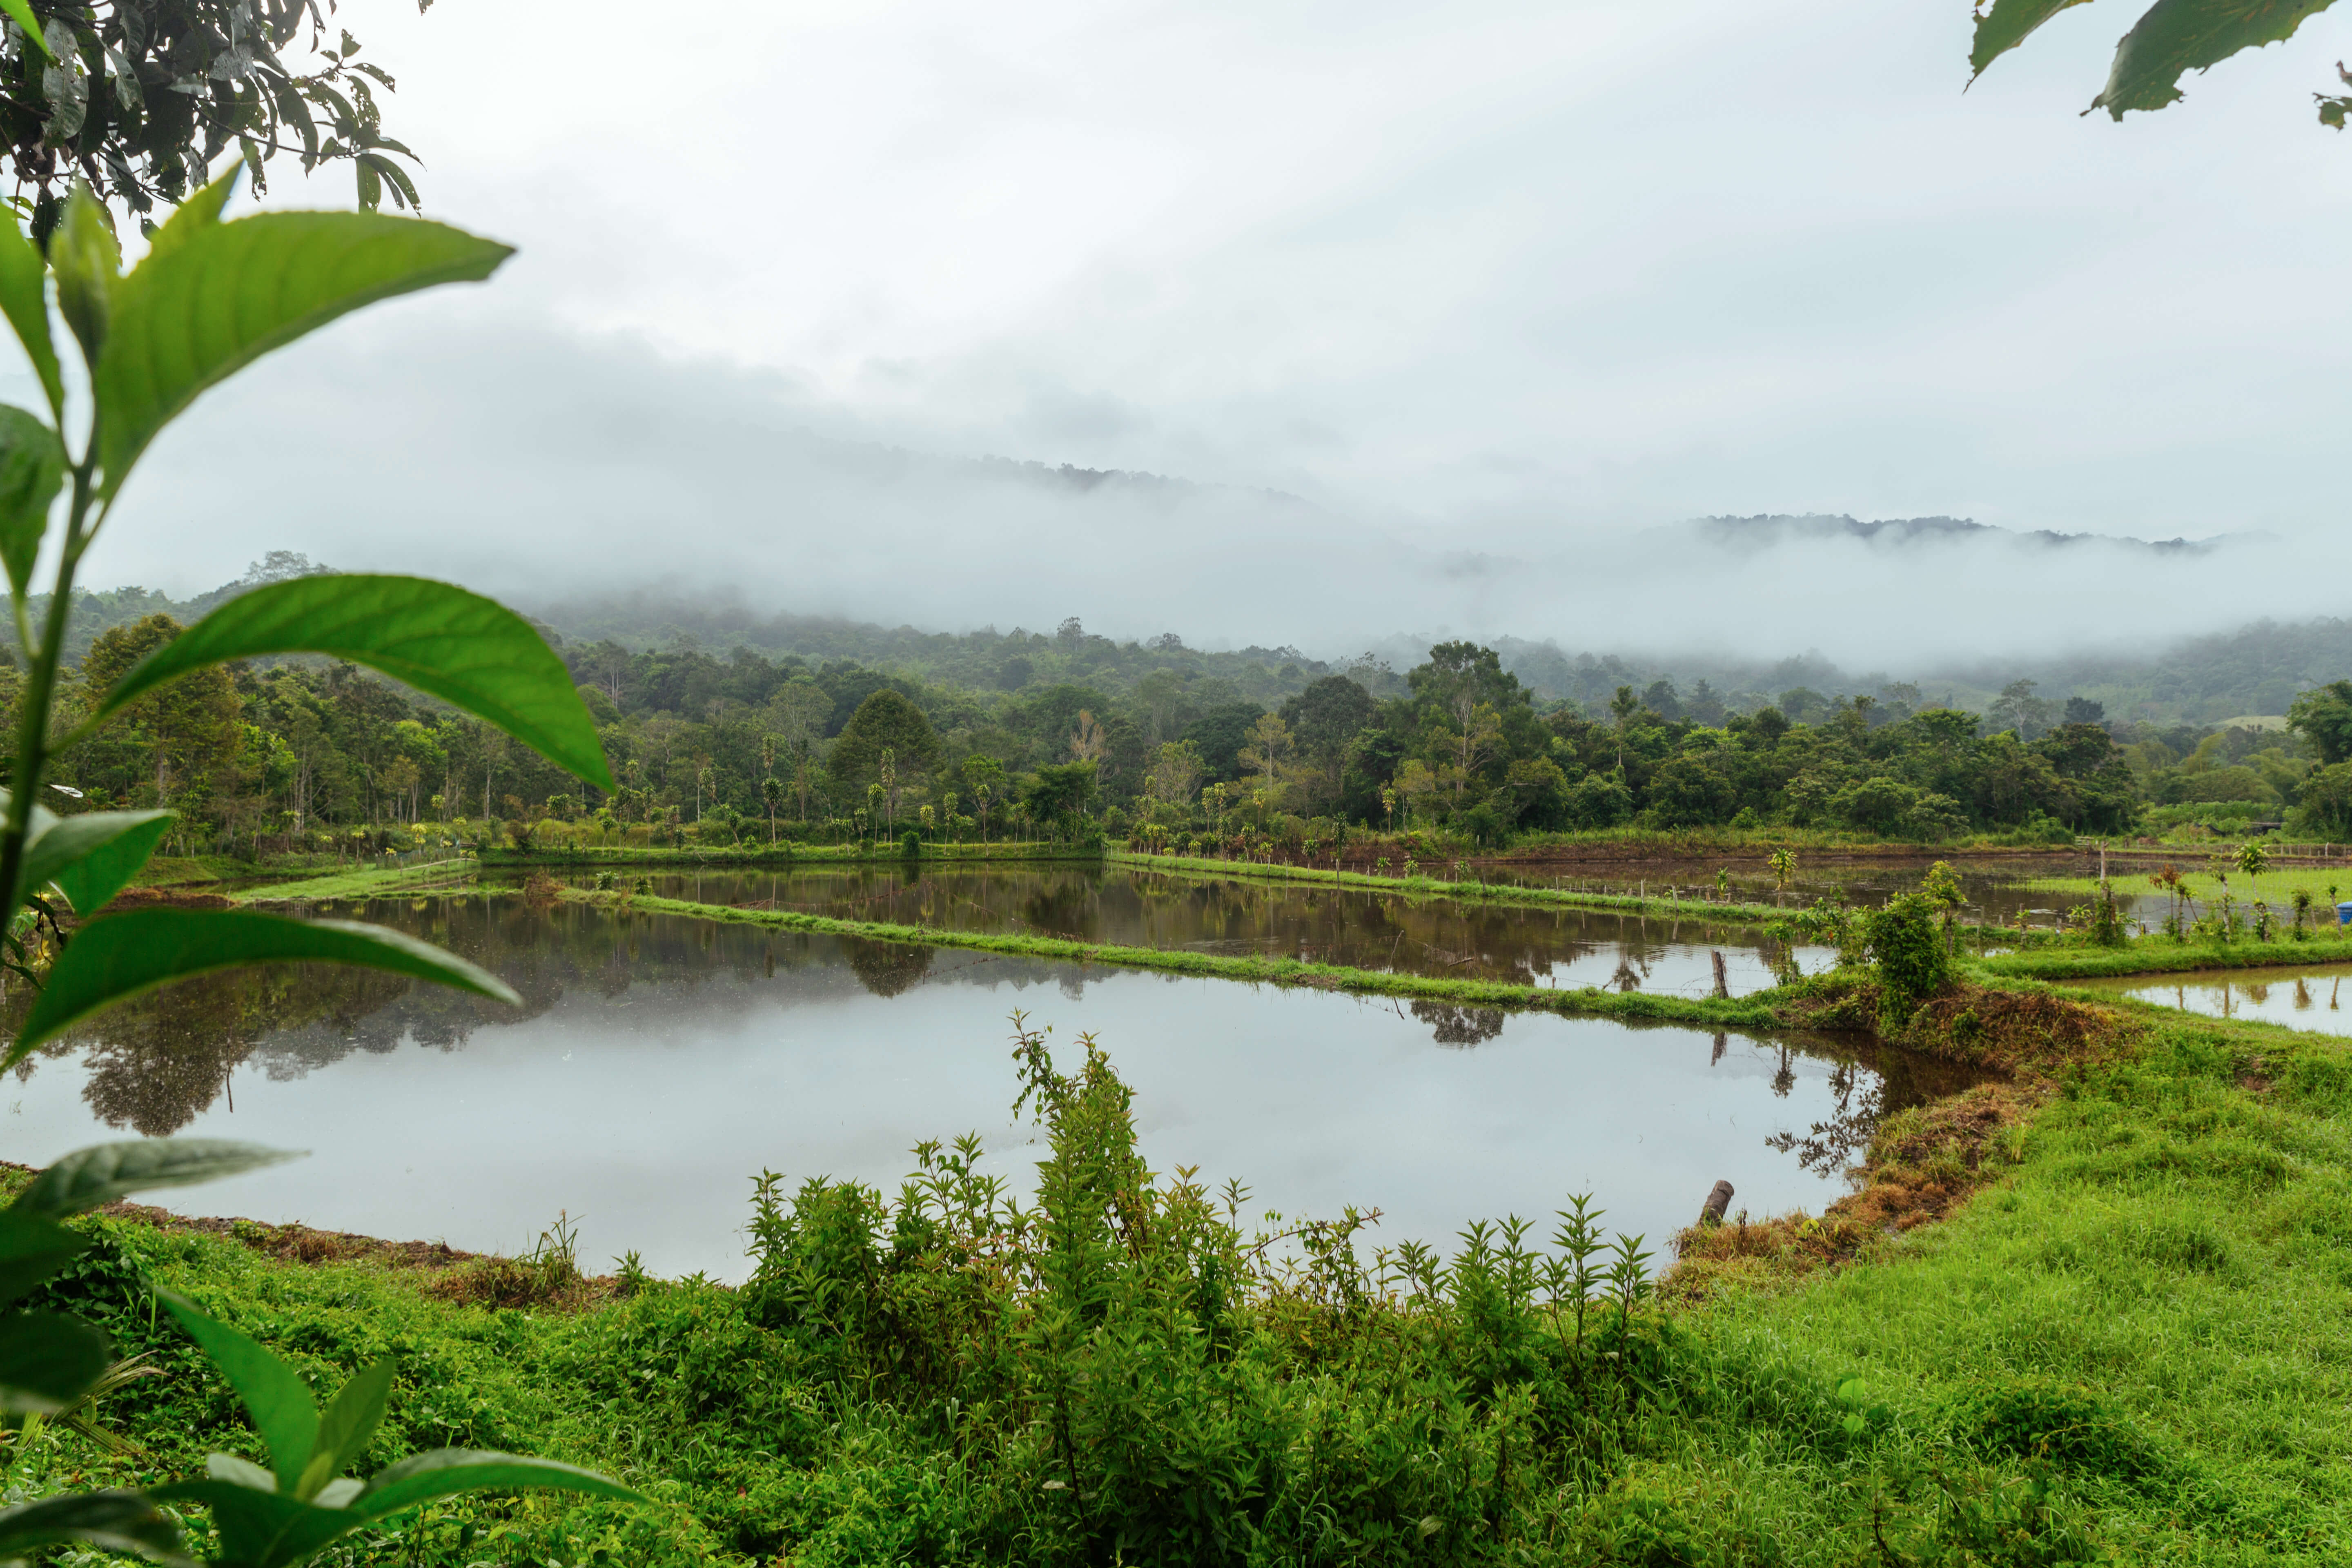 View of a rice paddies submerged in water, surrounded by lush greenery-covered mountains.